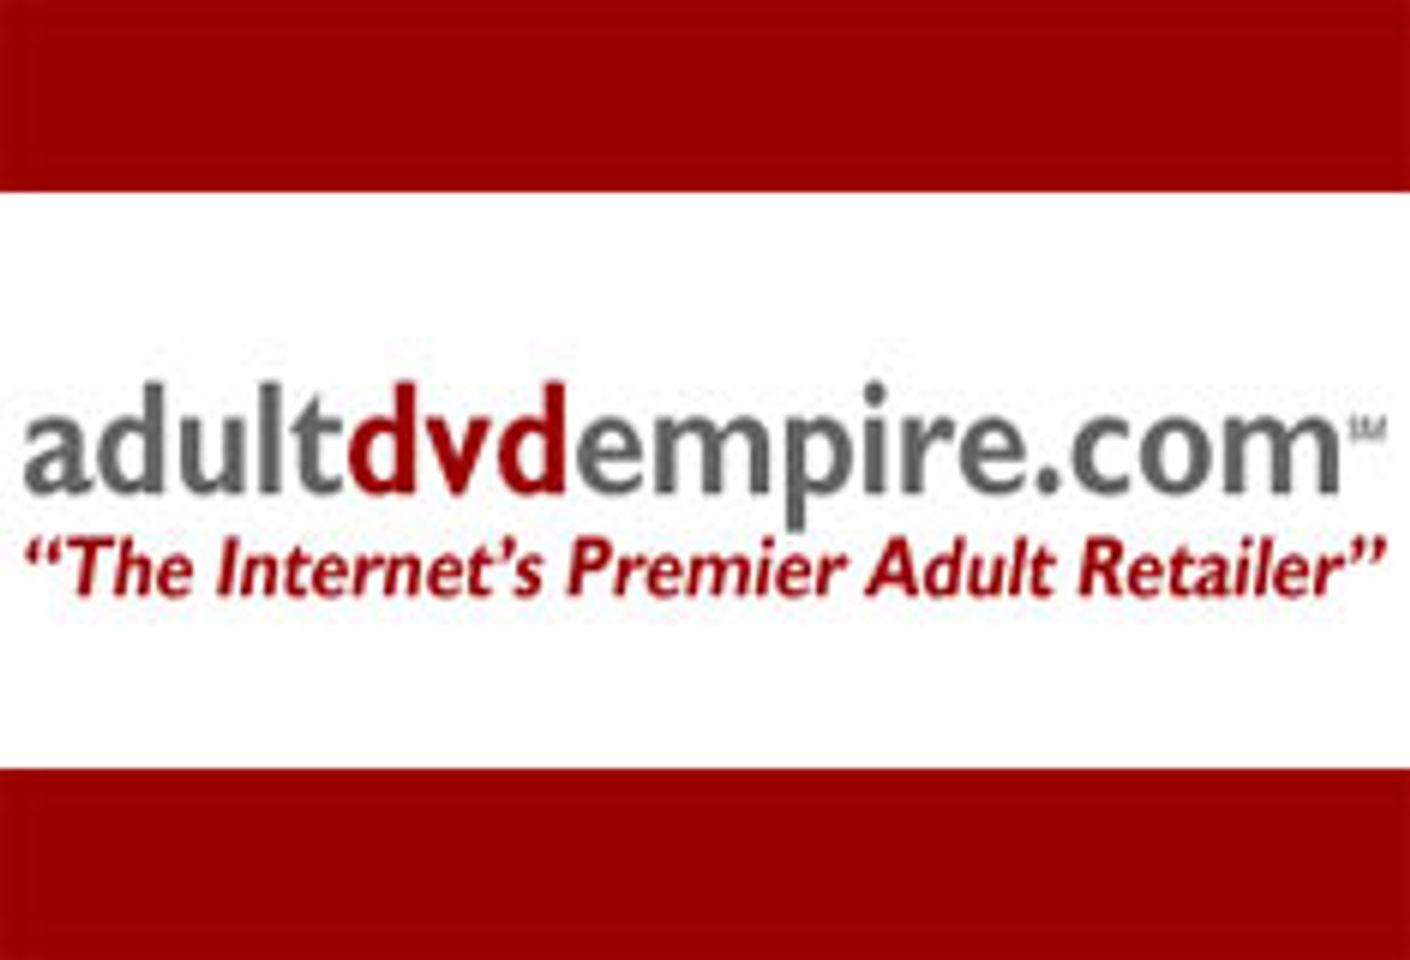 DVD Empire Applies for Patent For New VoD Features